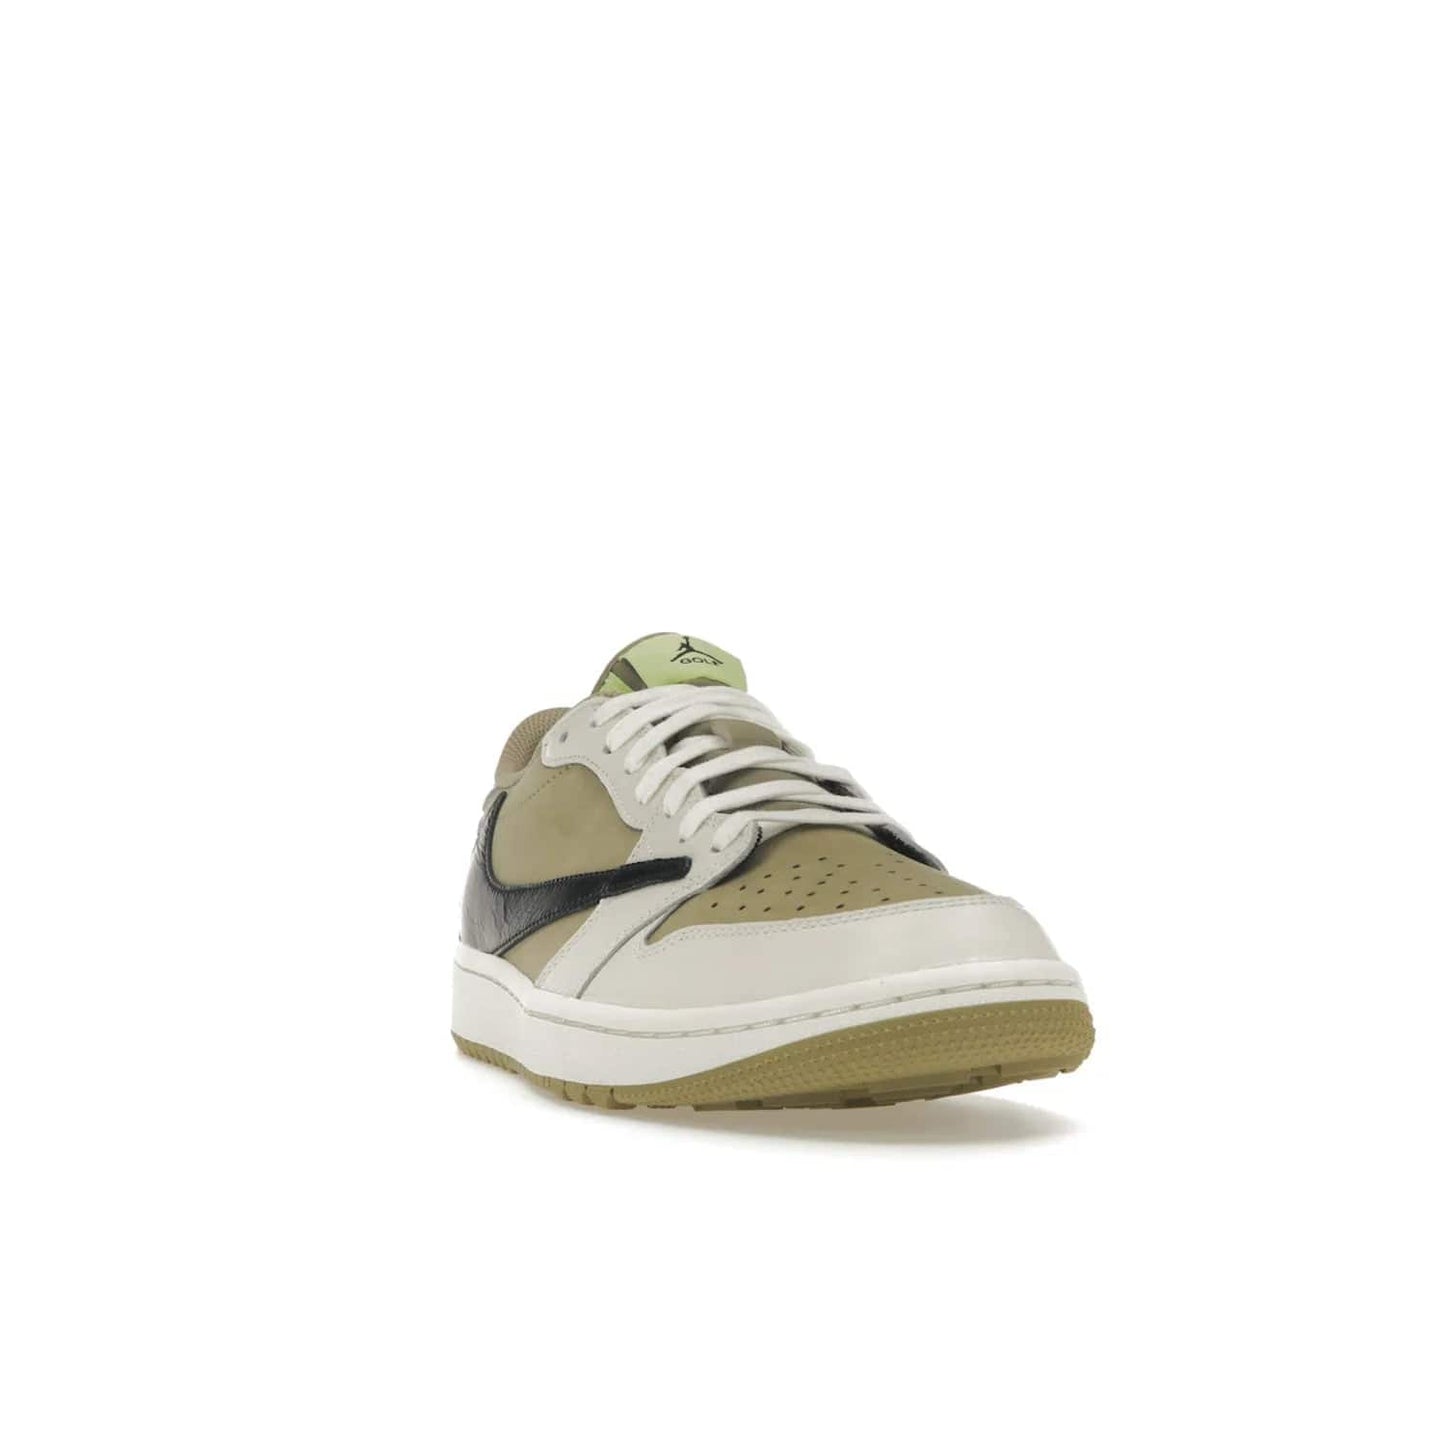 Jordan 1 Retro Low Golf Travis Scott Neutral Olive - Image 8 - Only at www.BallersClubKickz.com - Explore the unique Jordan 1 Retro Low Golf Travis Scott Neutral Olive, an olive-green sneaker collaboration between the iconic Jordan Brand and music royalty, Travis Scott. This special pair is tailored for the golf course with altered traction, hardened rubber, and a sleek style perfect for everyday wear. Get your pair and impress the crowd with its signature earth tones.